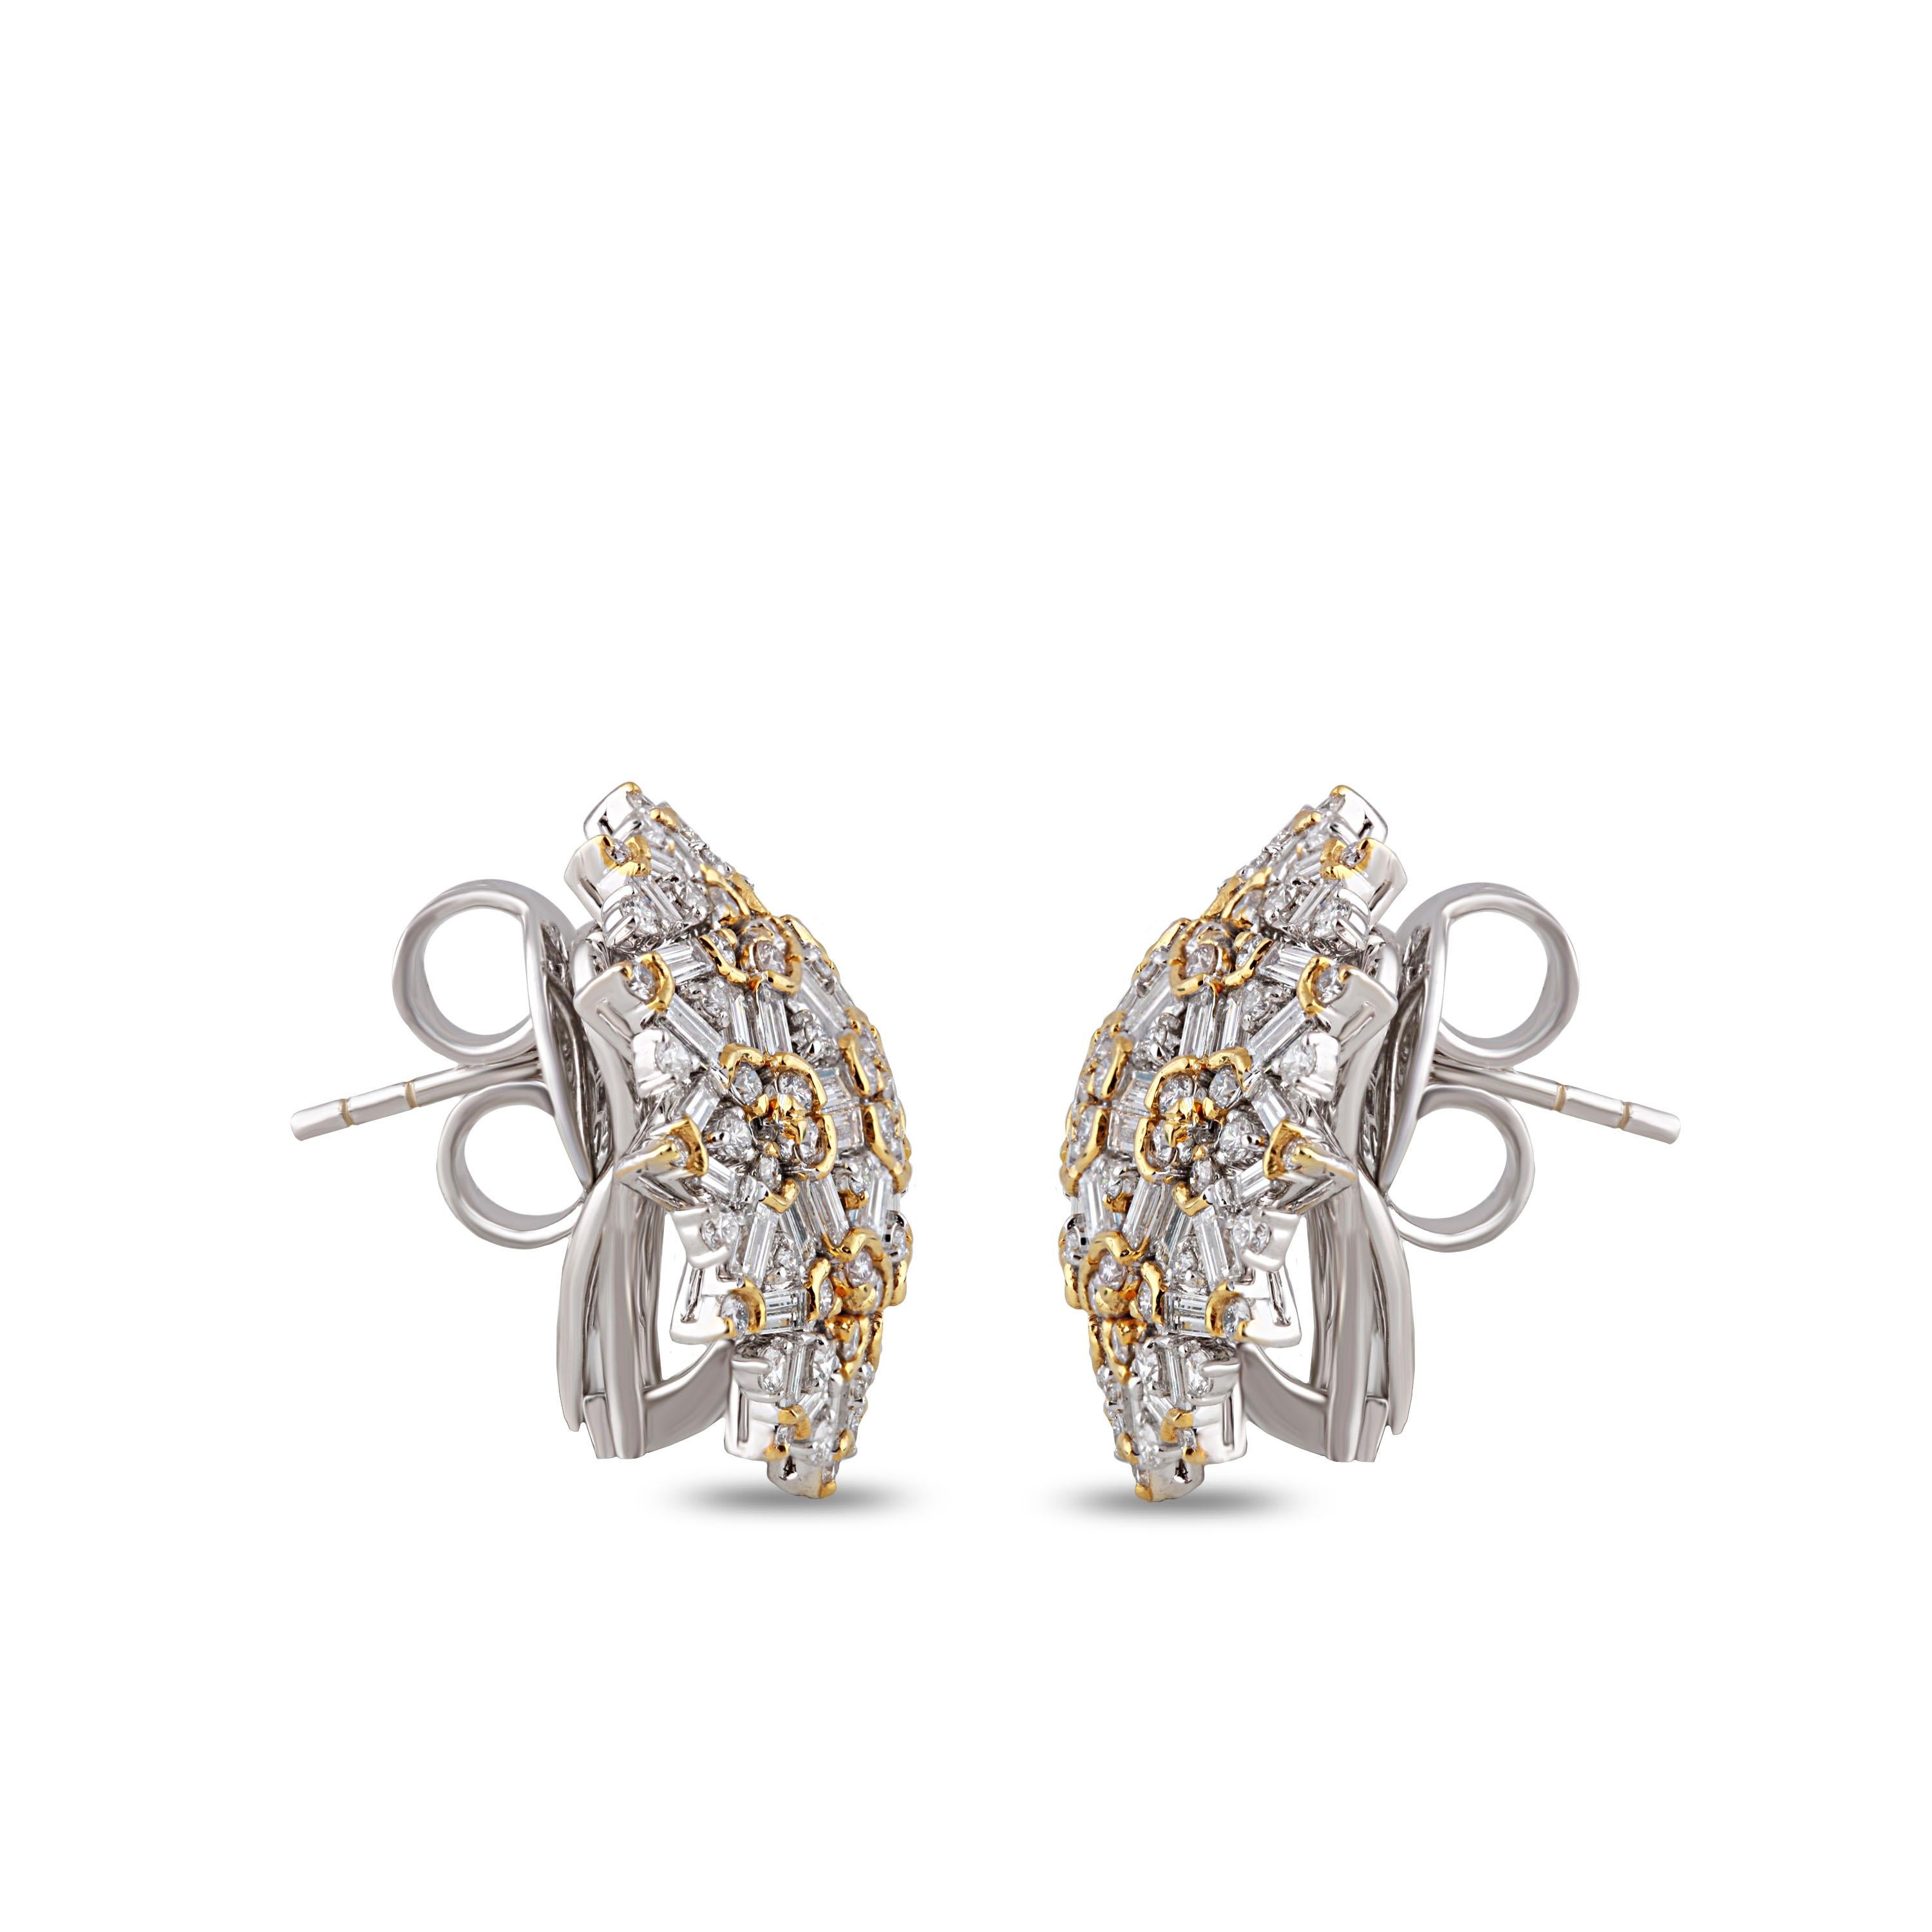 Contemporary Floral Stud Earrings in Diamonds and 18 Karat Gold